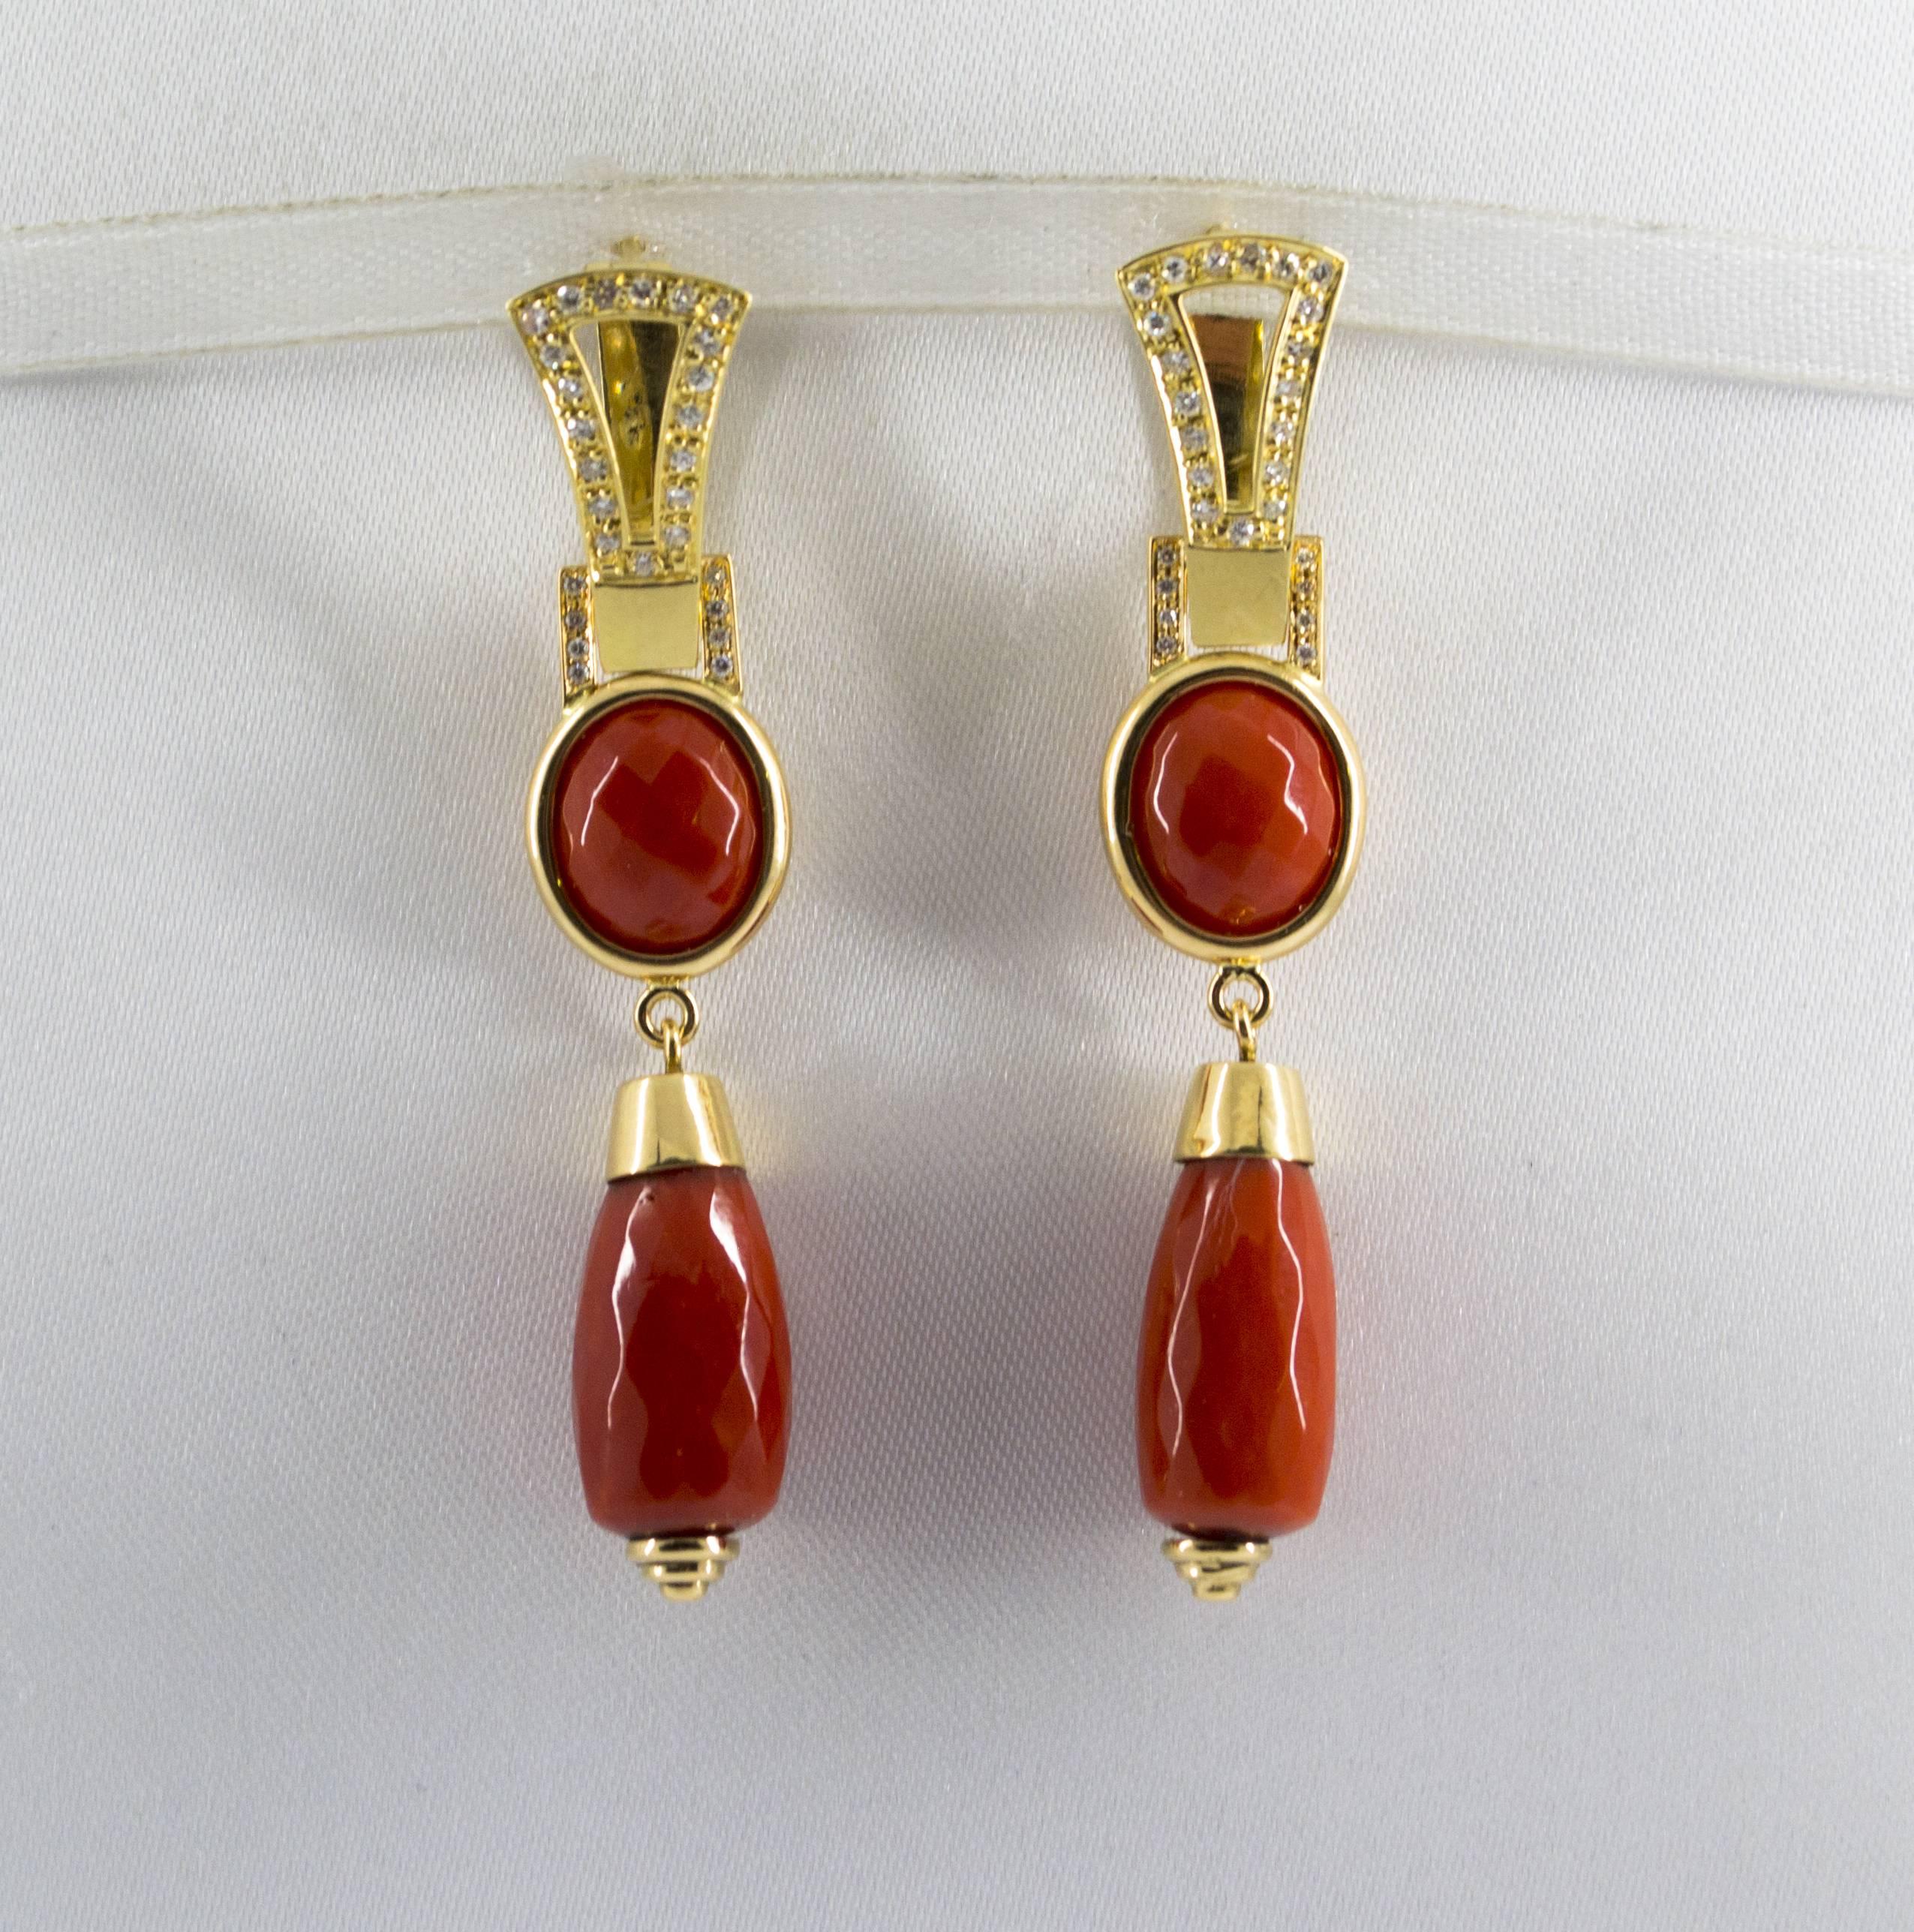 These Earrings are made of 18K Yellow Gold.
These Earrings have 0.40 Carats of White Diamonds.
These Earrings have Red Mediterranean (Sardinia, Italy) Coral.
All our Earrings have pins for pierced ears but we can change the closure and make any of